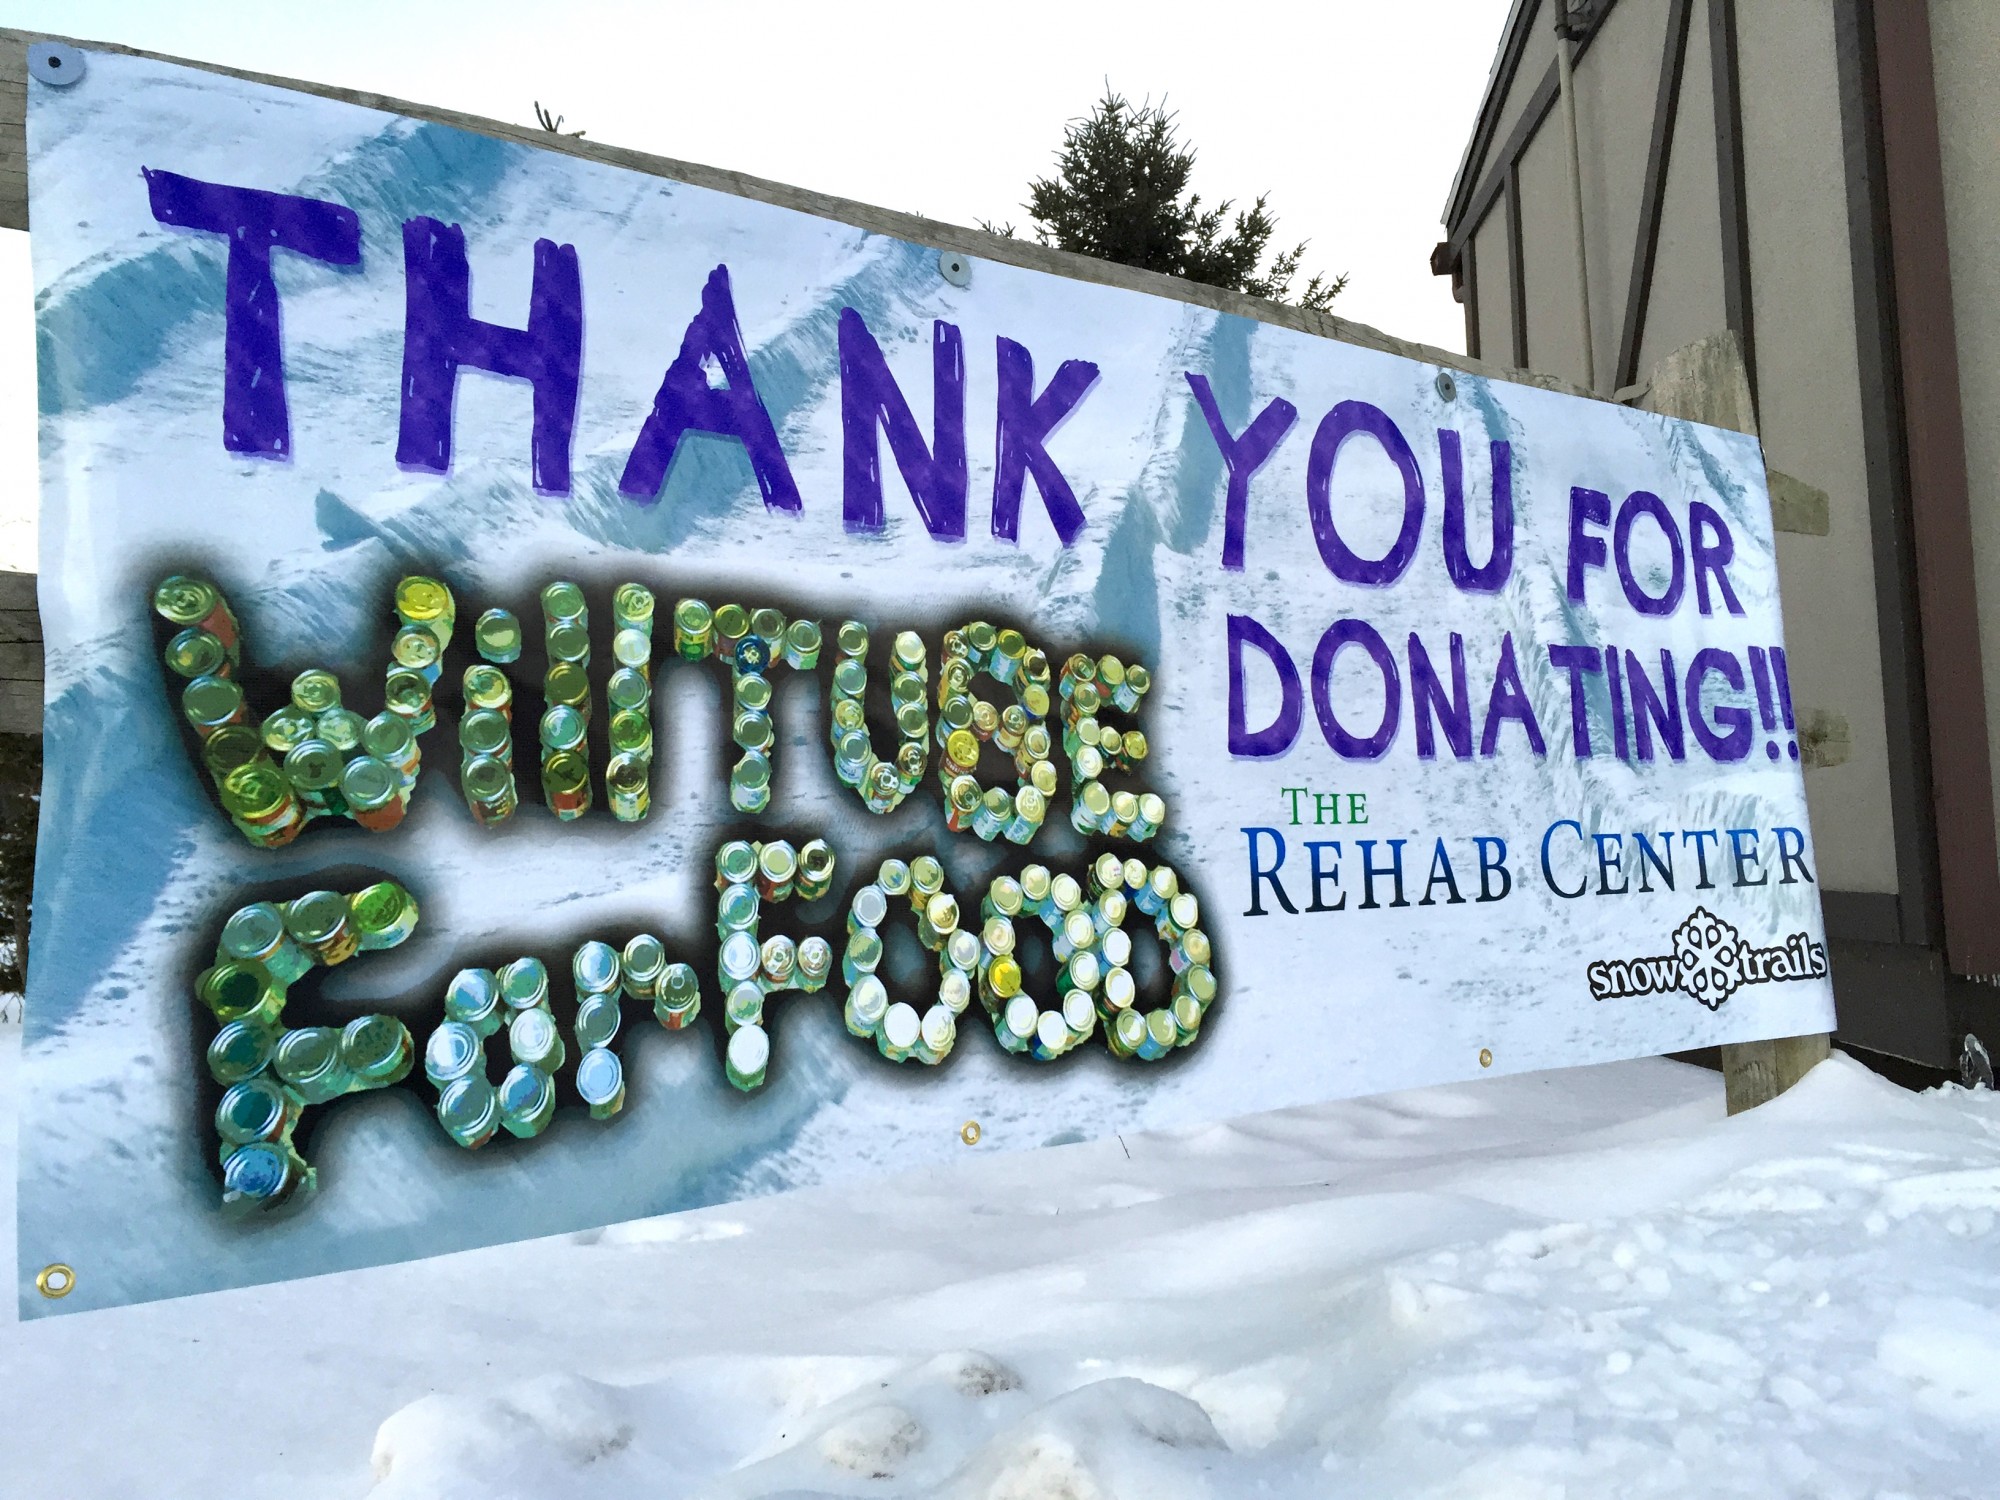 Will Tube For Food- Thank You for Donating!! The Rehab Center and Snow Trails